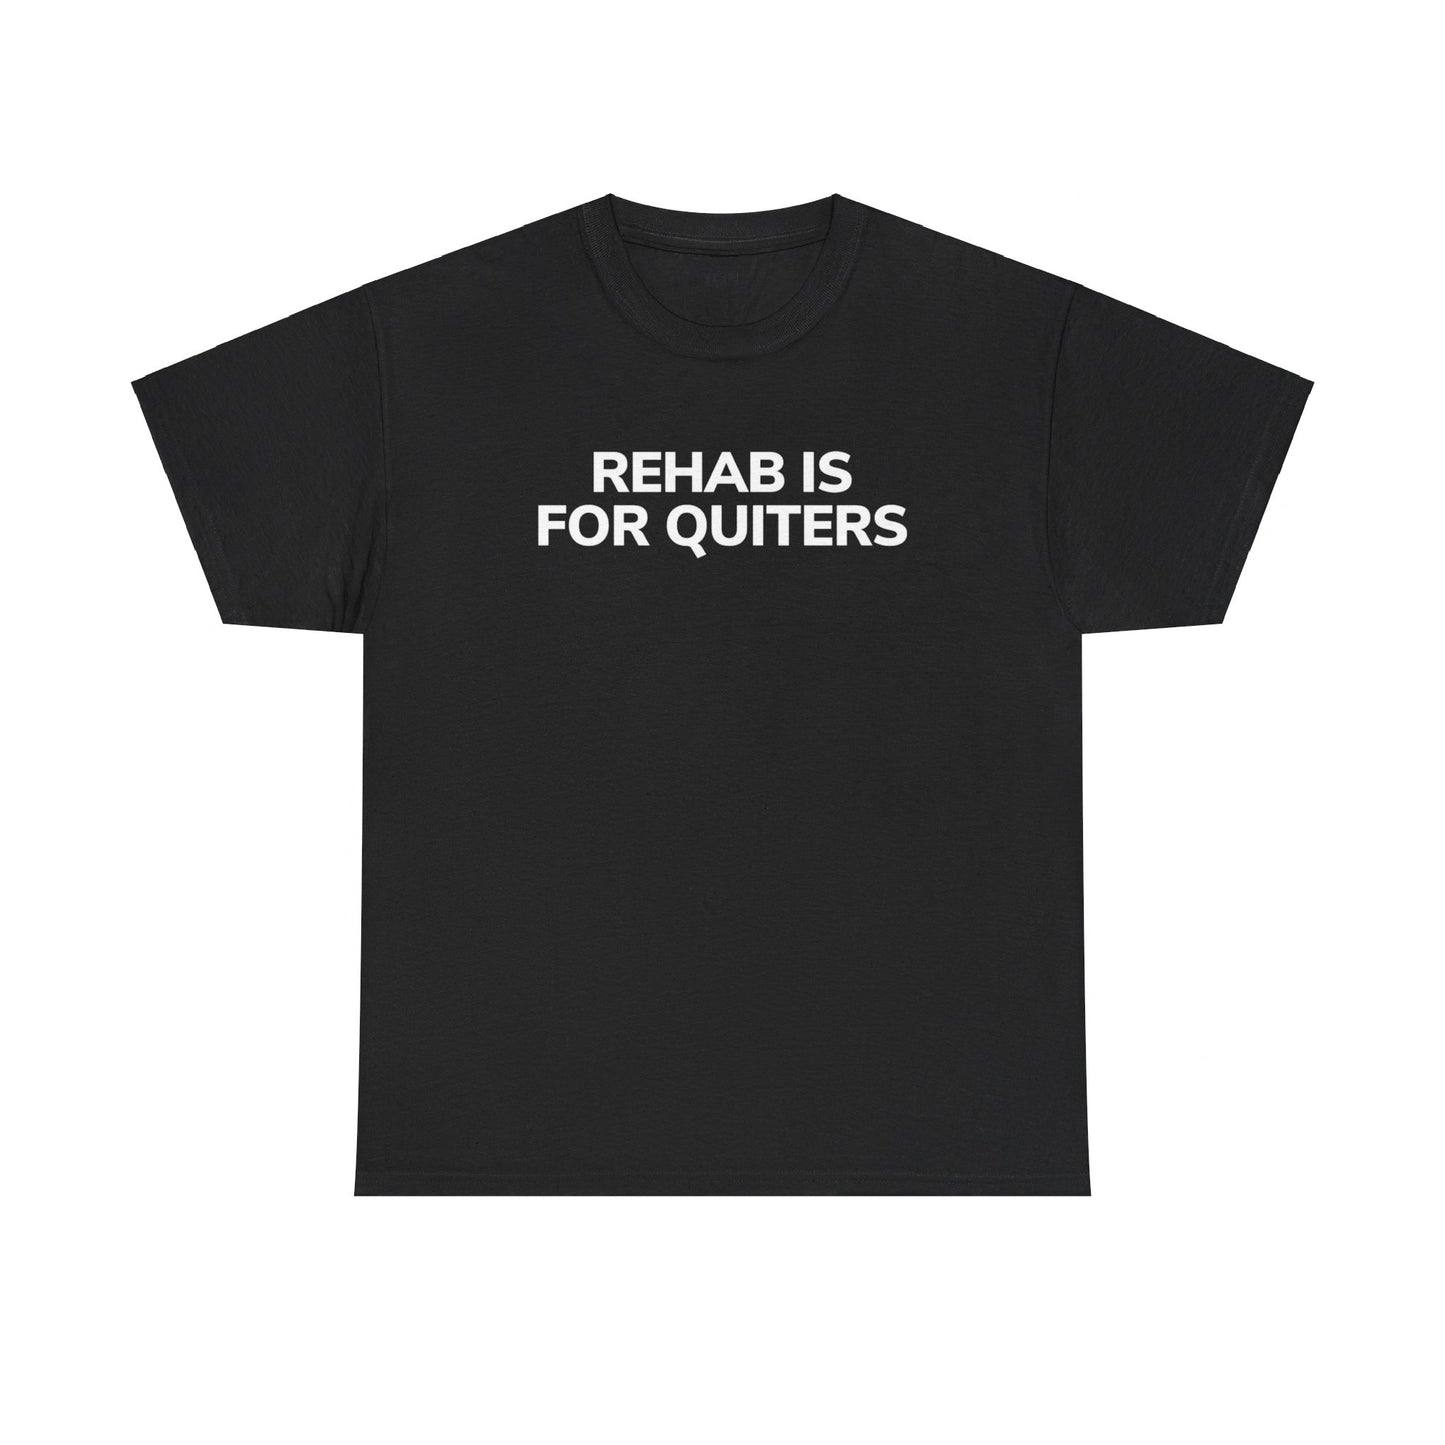 REHAB IS FOR QUITTERS (T - SHIRT)